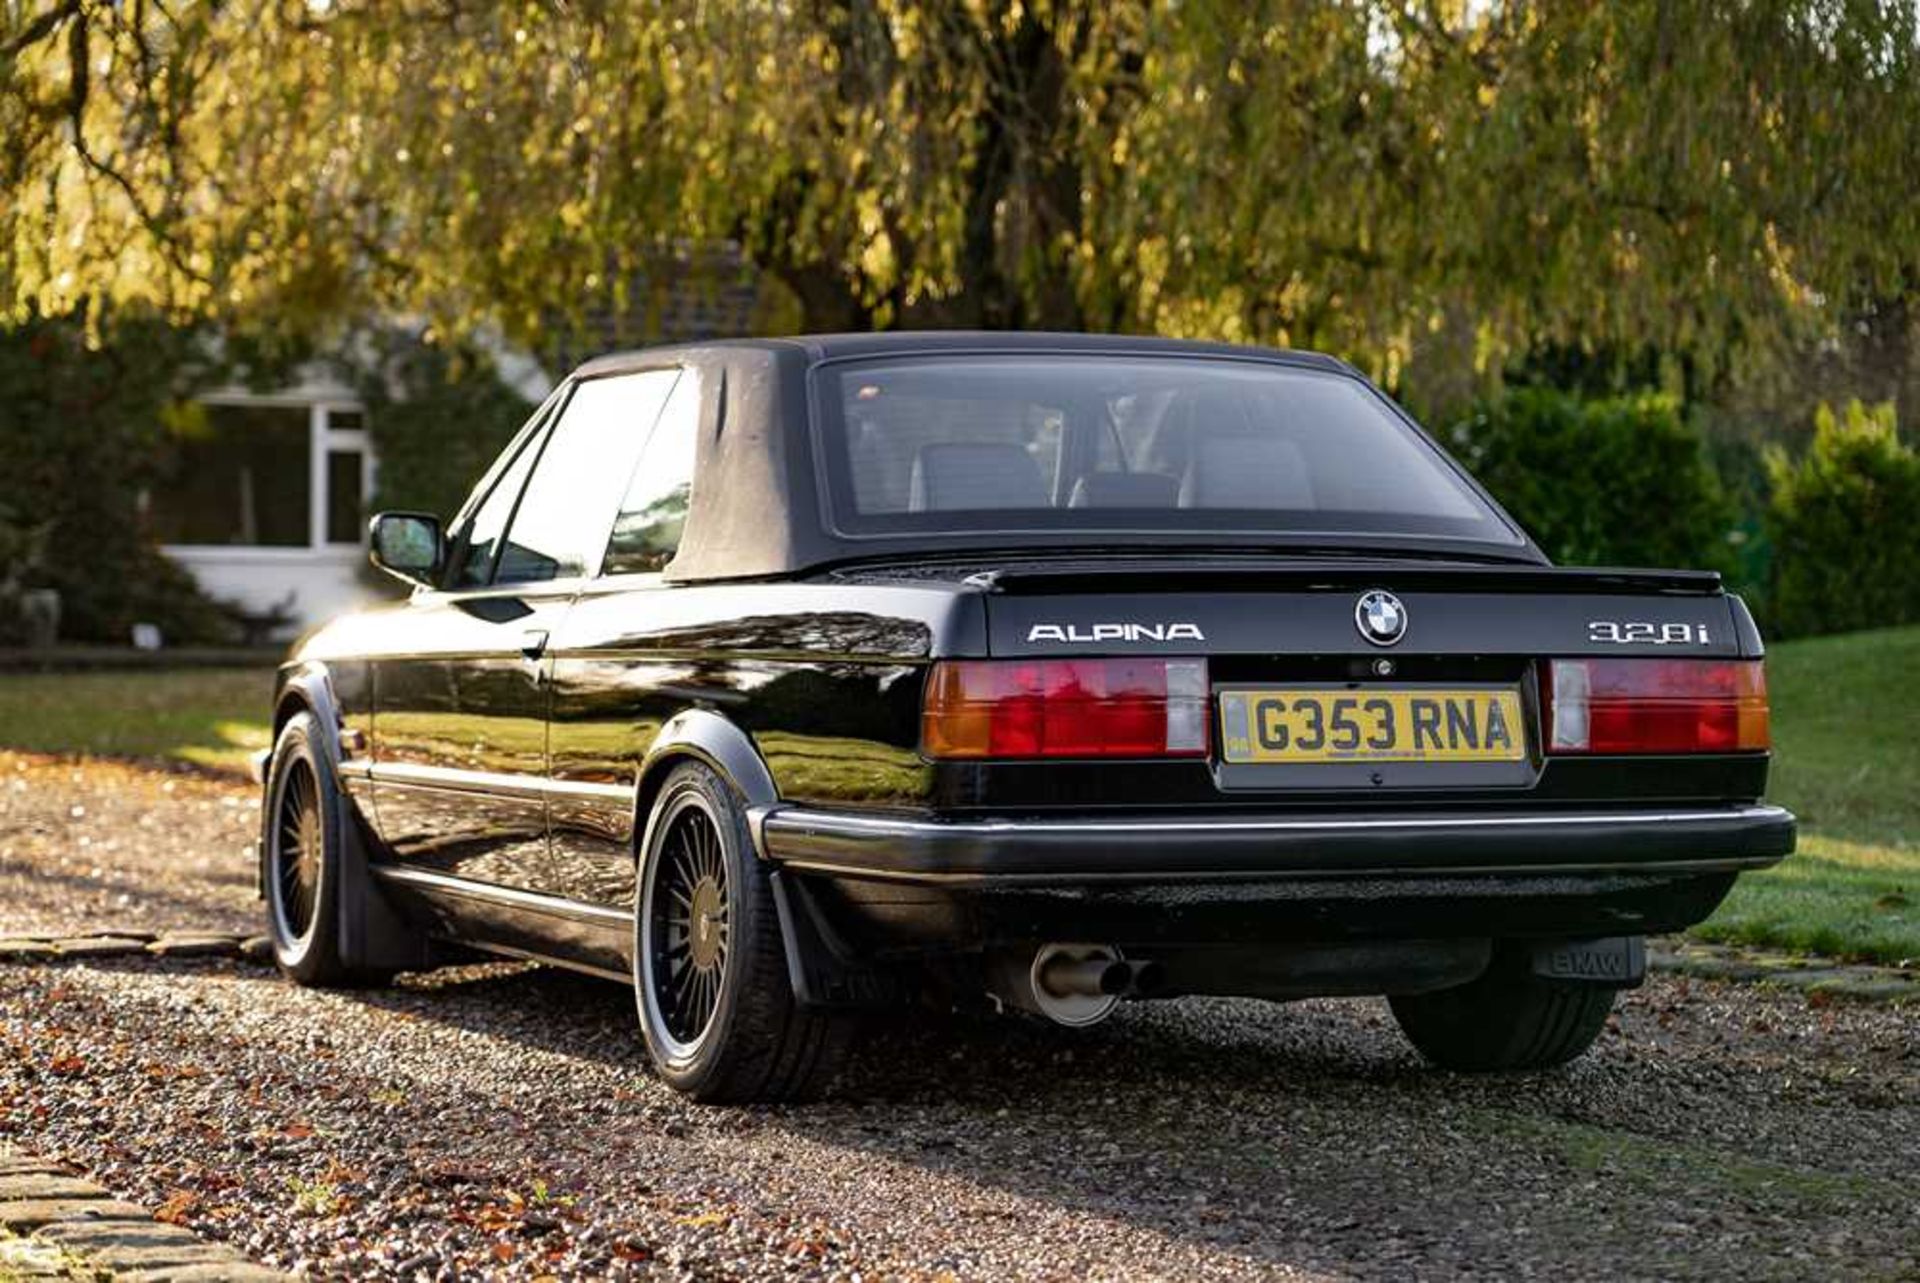 1989 BMW 320i Convertible Converted to Alpina 328i Specification - Image 11 of 51